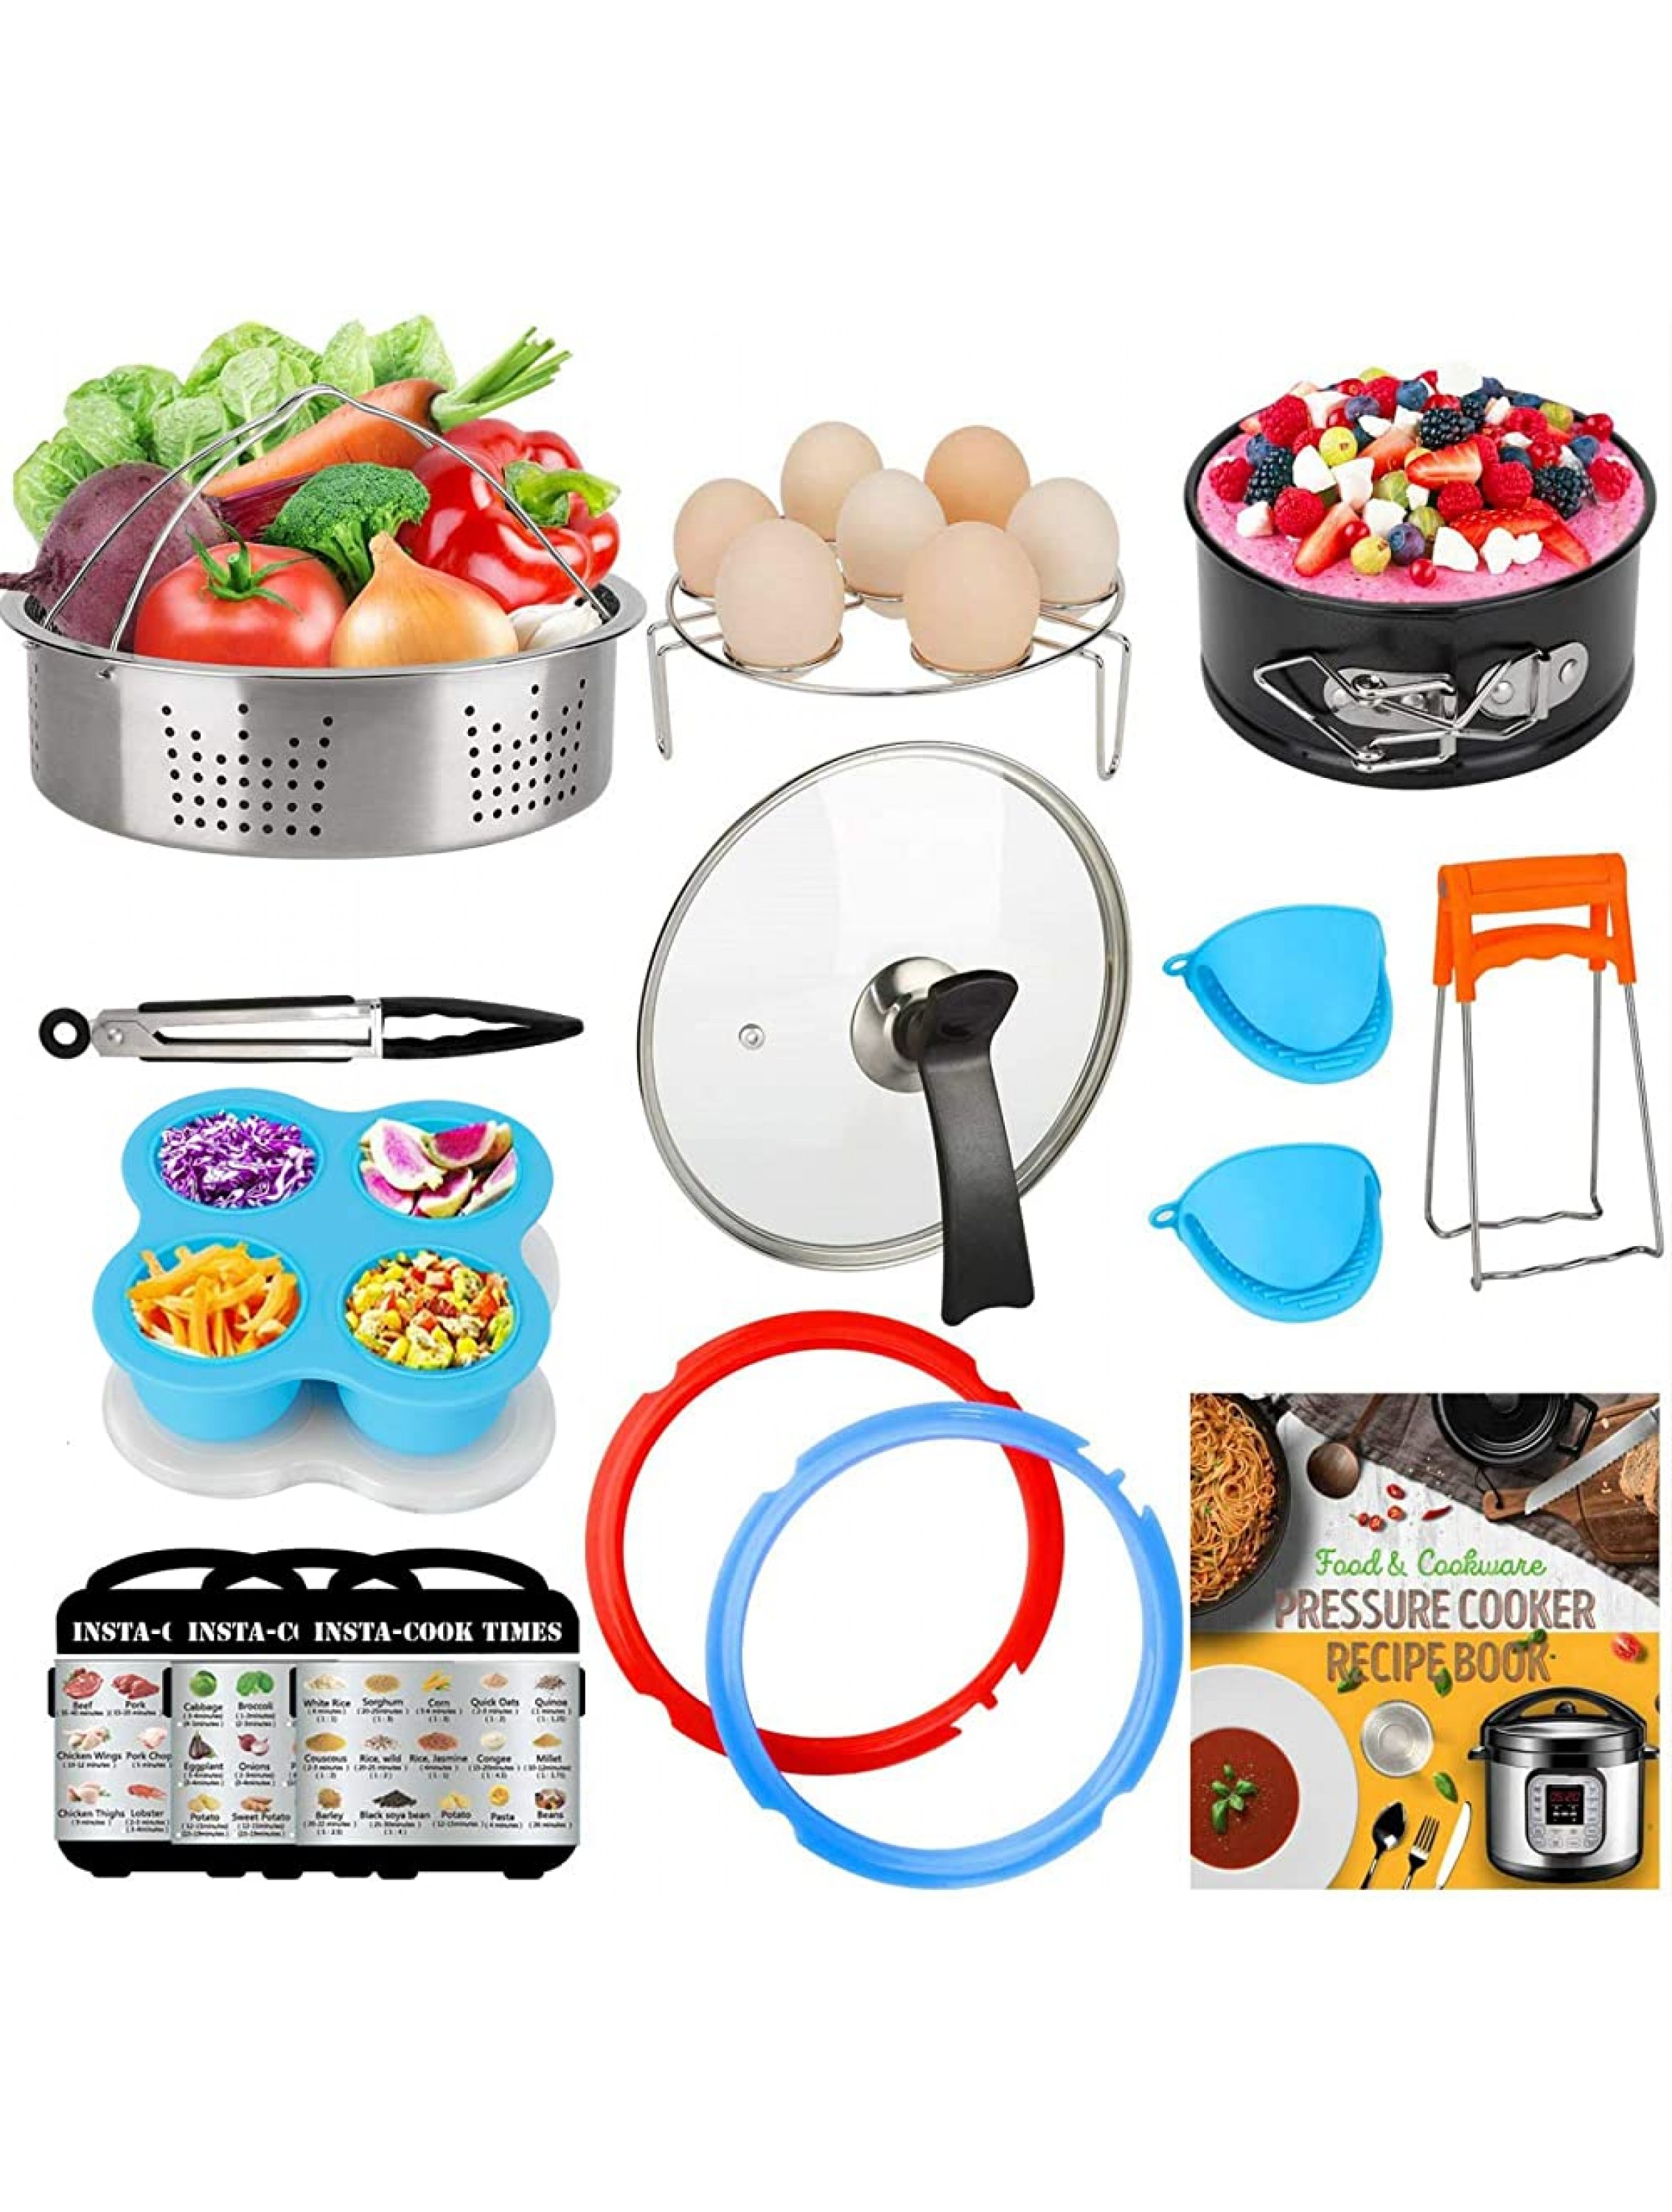 3-Quart-Accessories-Set with Tempered Glass Lid Sealing Rings Compatible with Instant Pot Mini 3 Including Steamer Basket Springform Pan Egg Rack Trivet Works with 3 Qt Instapot Cookbook Cover - BMZNO8TW5